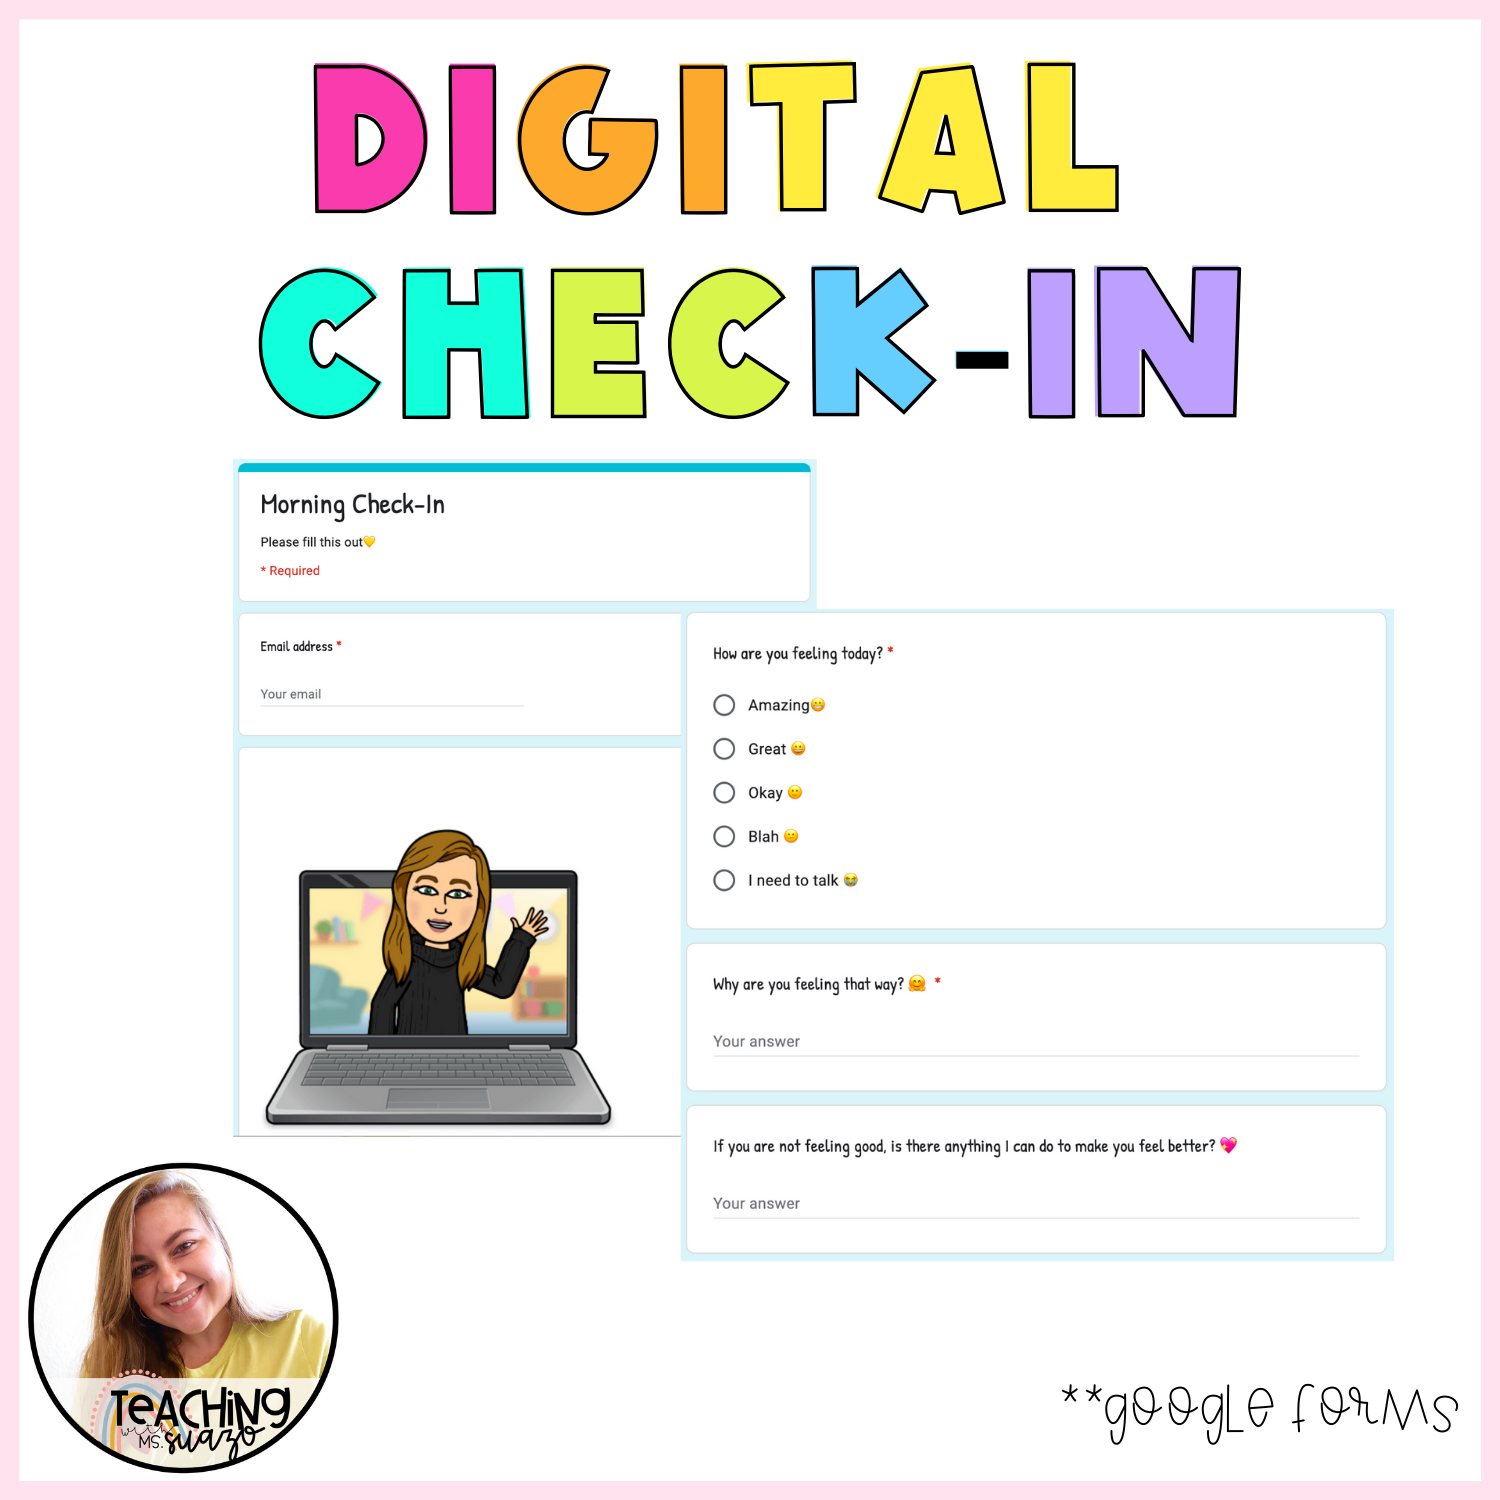 Digital Check-in's featured image